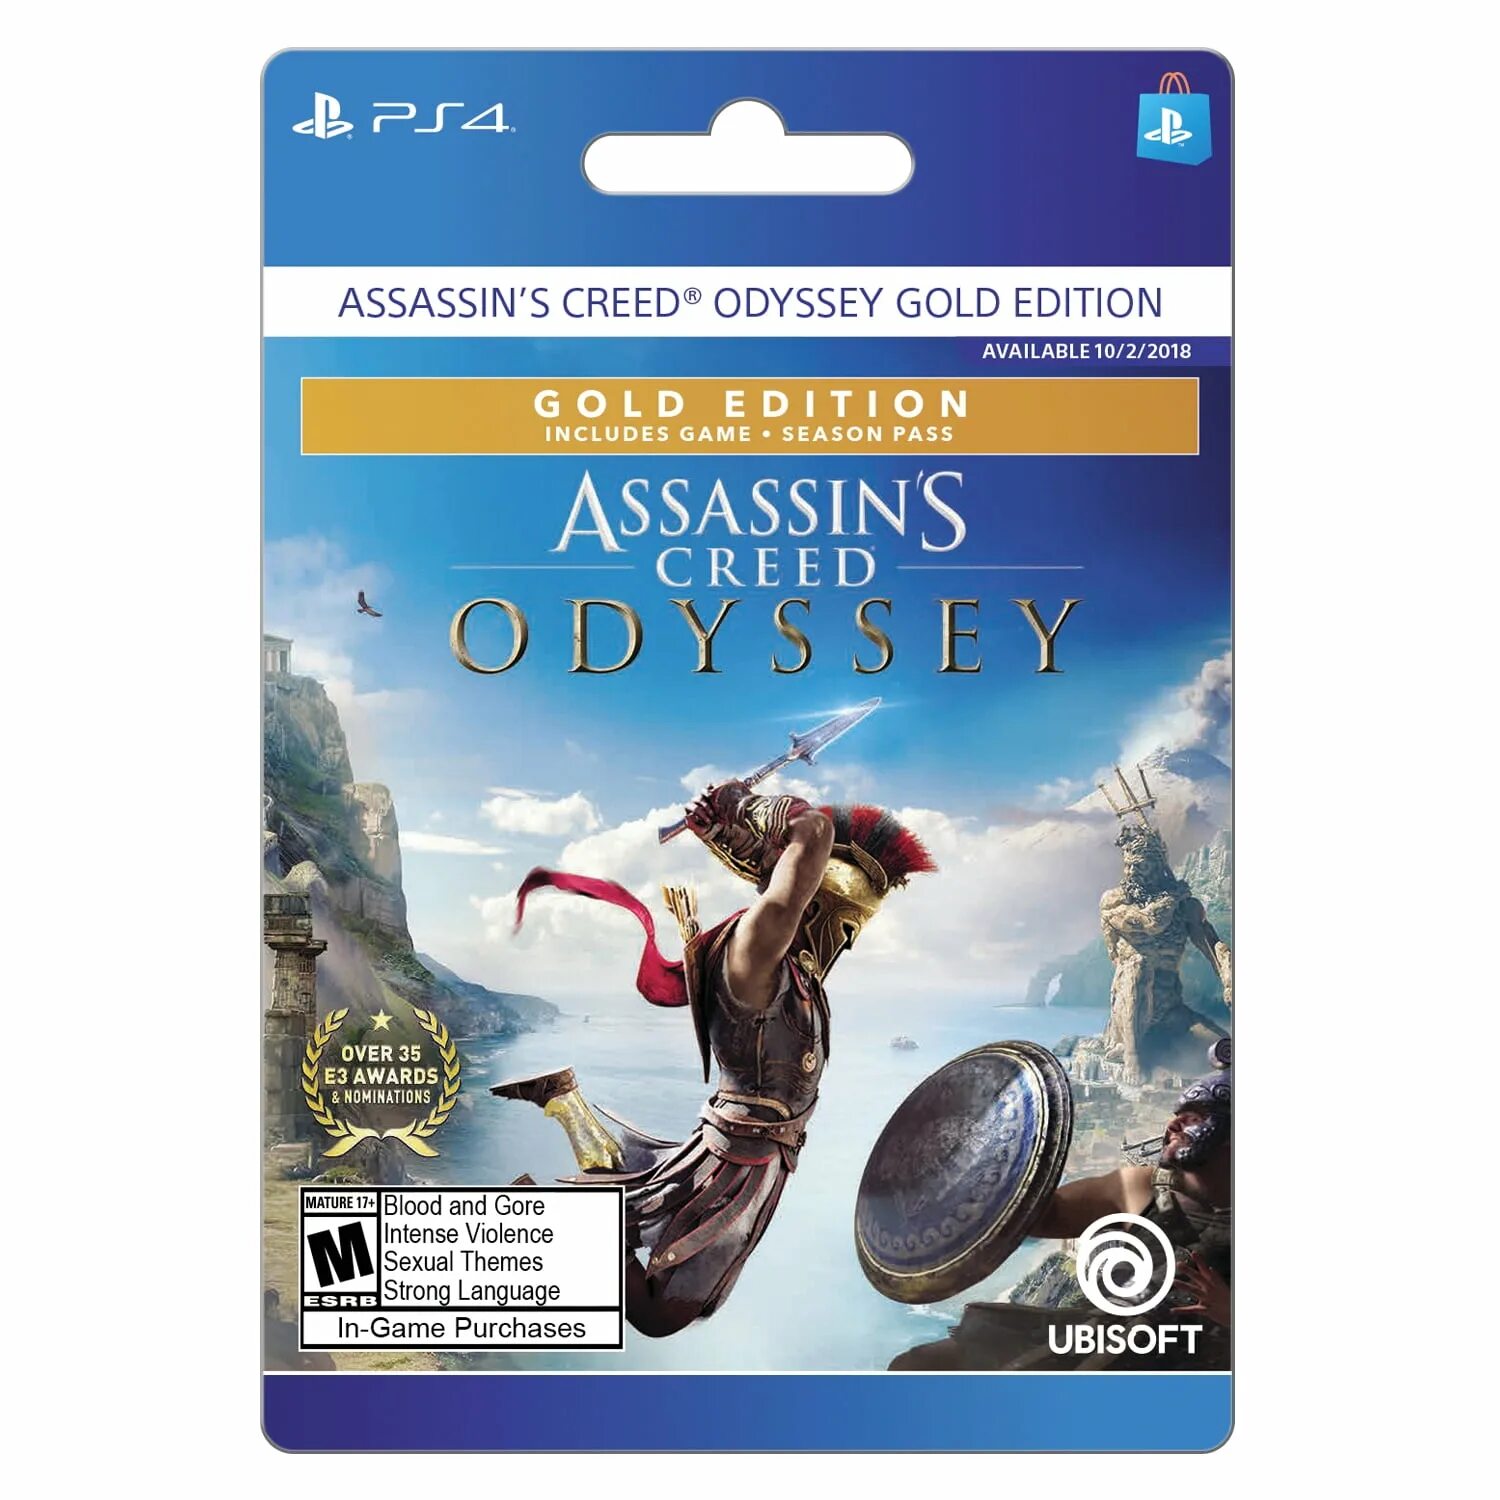 Assassin's Creed Odyssey Gold Edition ps4. Ассасин Крид Одиссея Голд эдишн. Assassin's Creed Odyssey Gold Edition ps4 диск. Ассасин Крид Одиссея пс4.